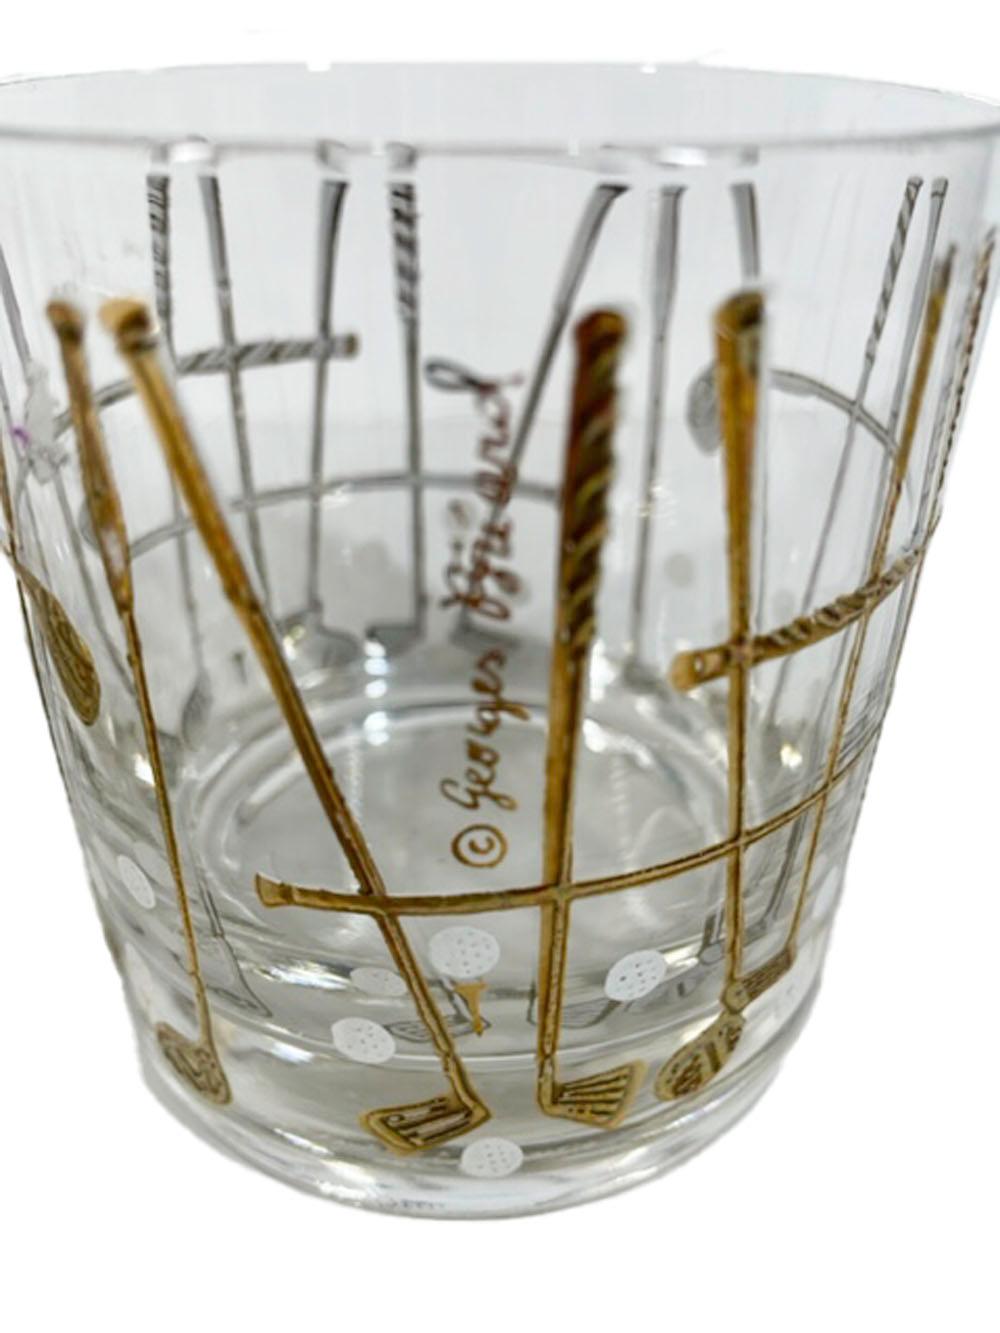 20th Century Vintage Georges Briard Rocks Glasses in the Golf Pattern Executed in 22k Gold